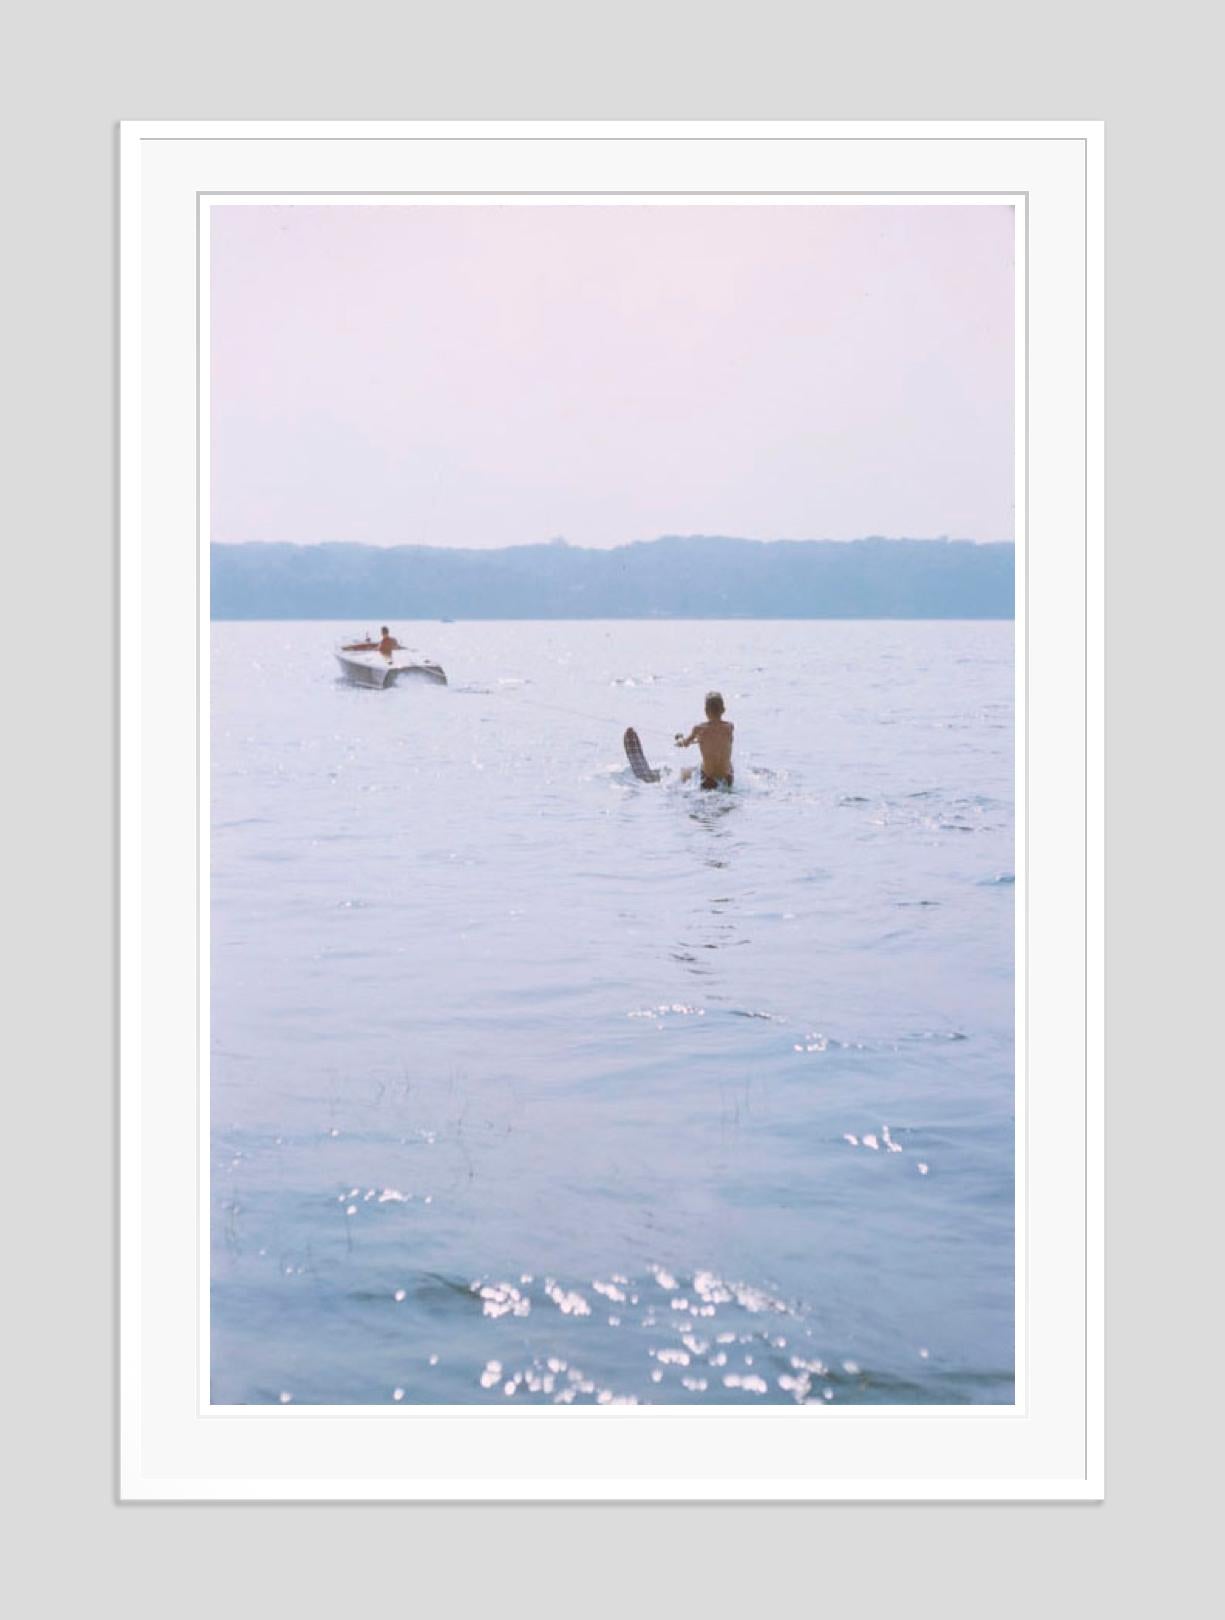 Water Skiing 1956 Limited Signature Stamped Edition  - Modern Photograph by Toni Frissell